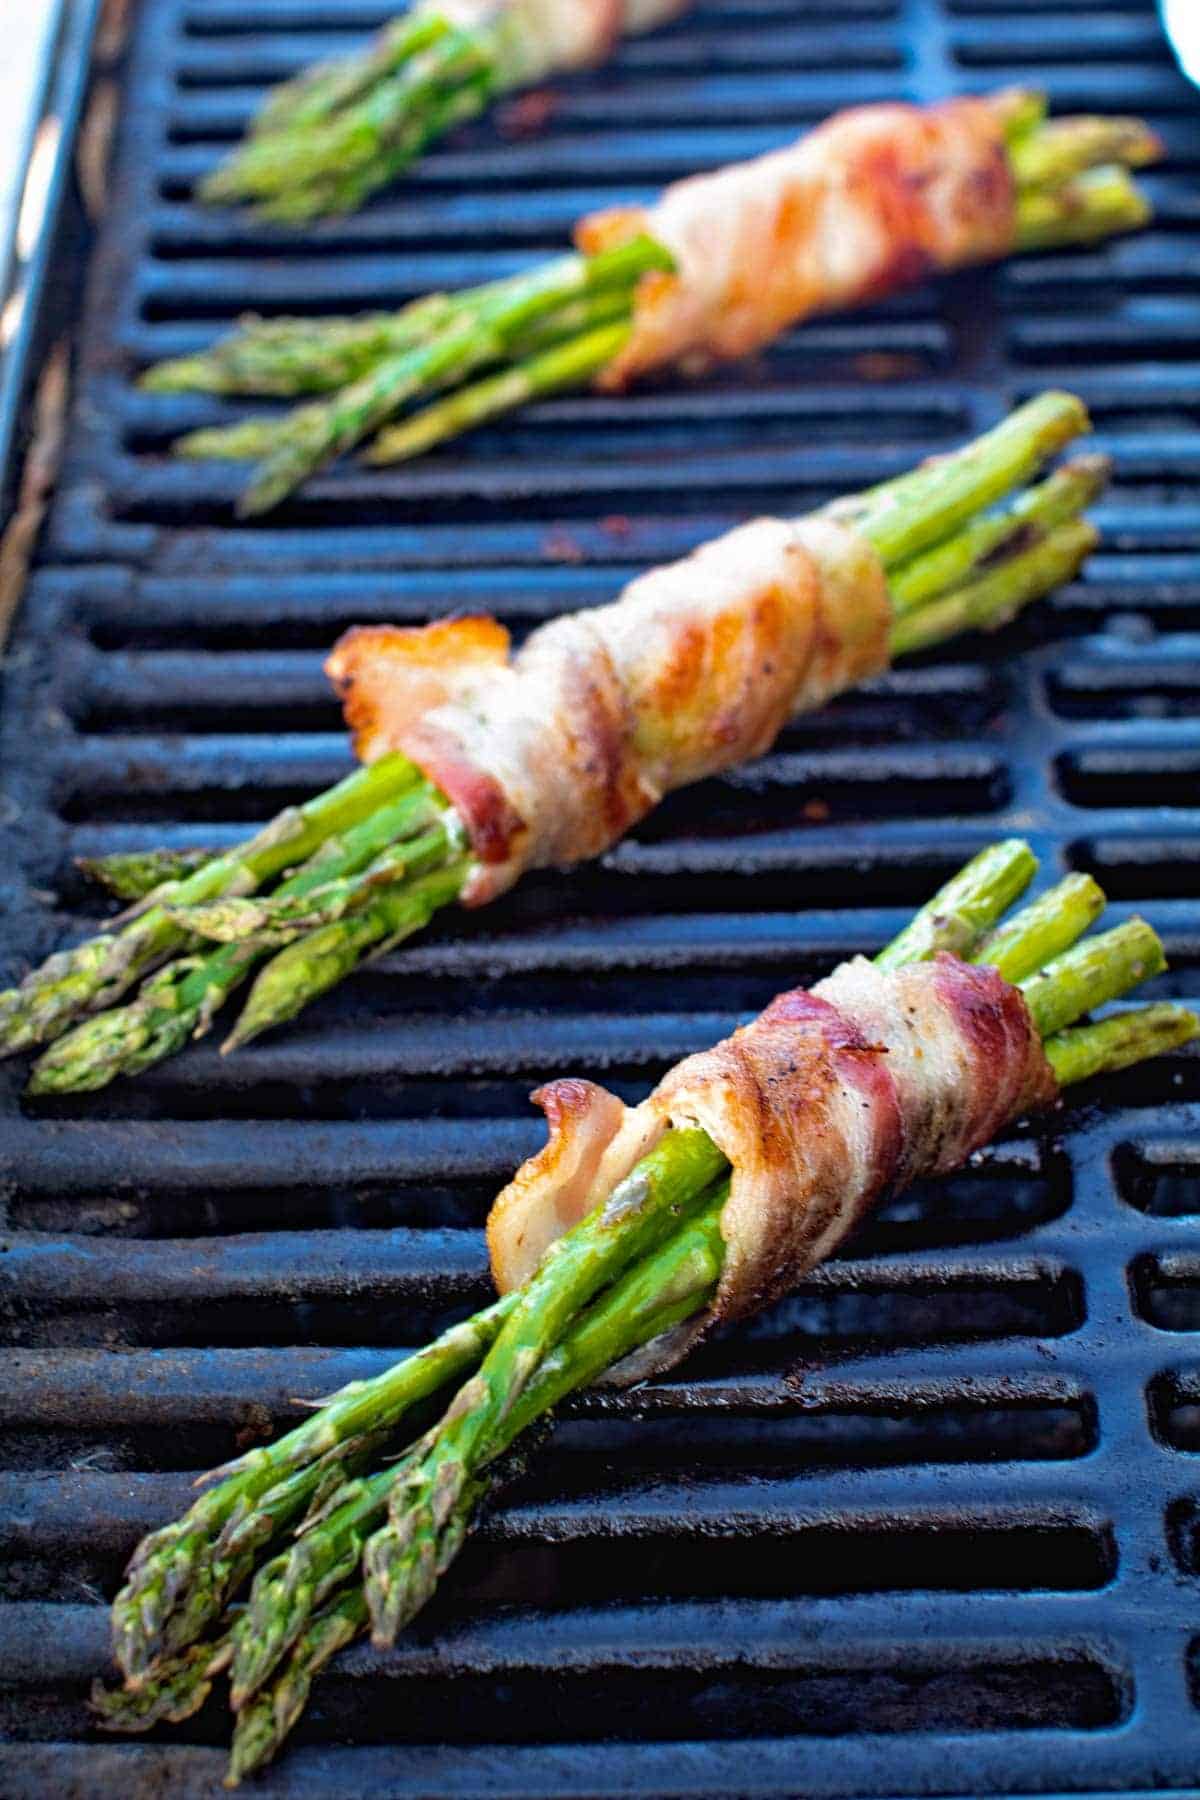 Grilled Bacon Wrapped Asparagus ~ Easy, Grilled Side Dish! Crispy Bacon Wrapped Around Tender Asparagus Spears!